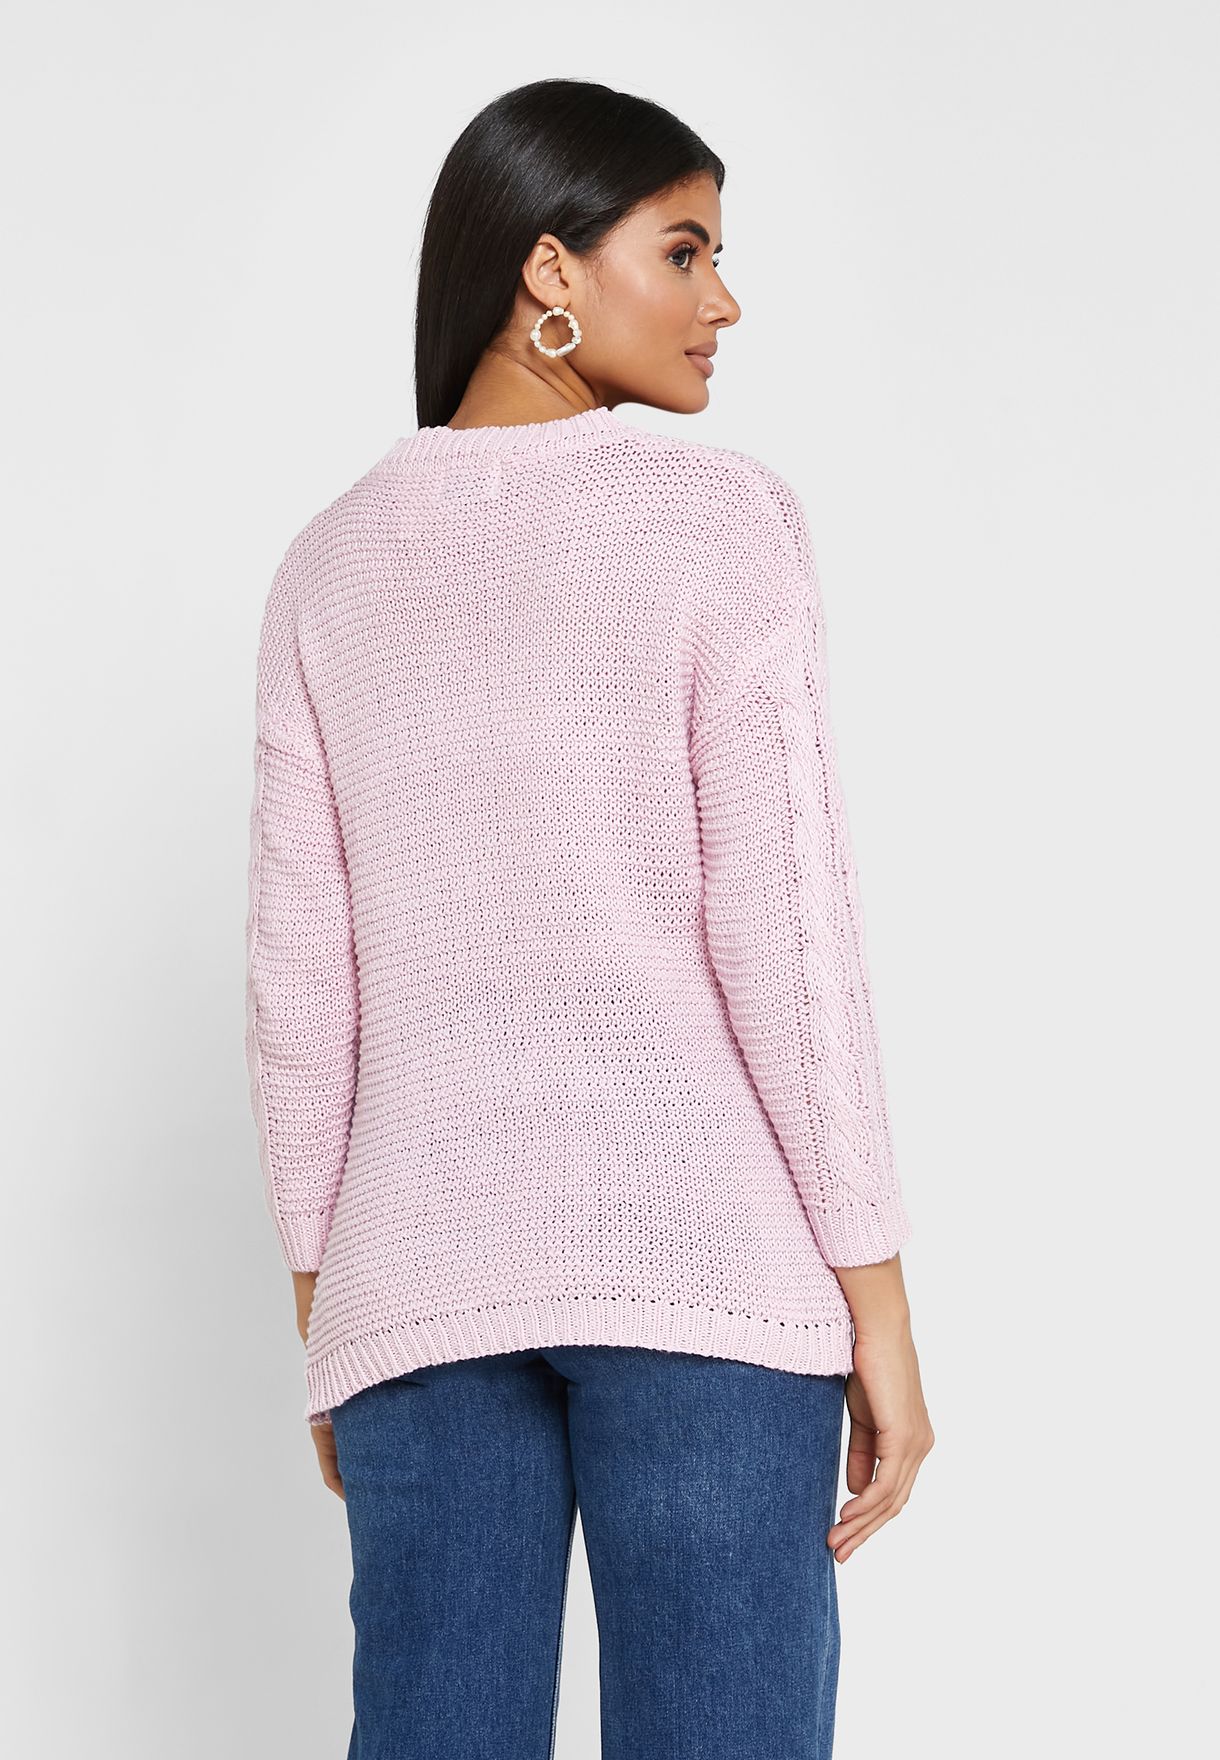 Braided Solid Sweater